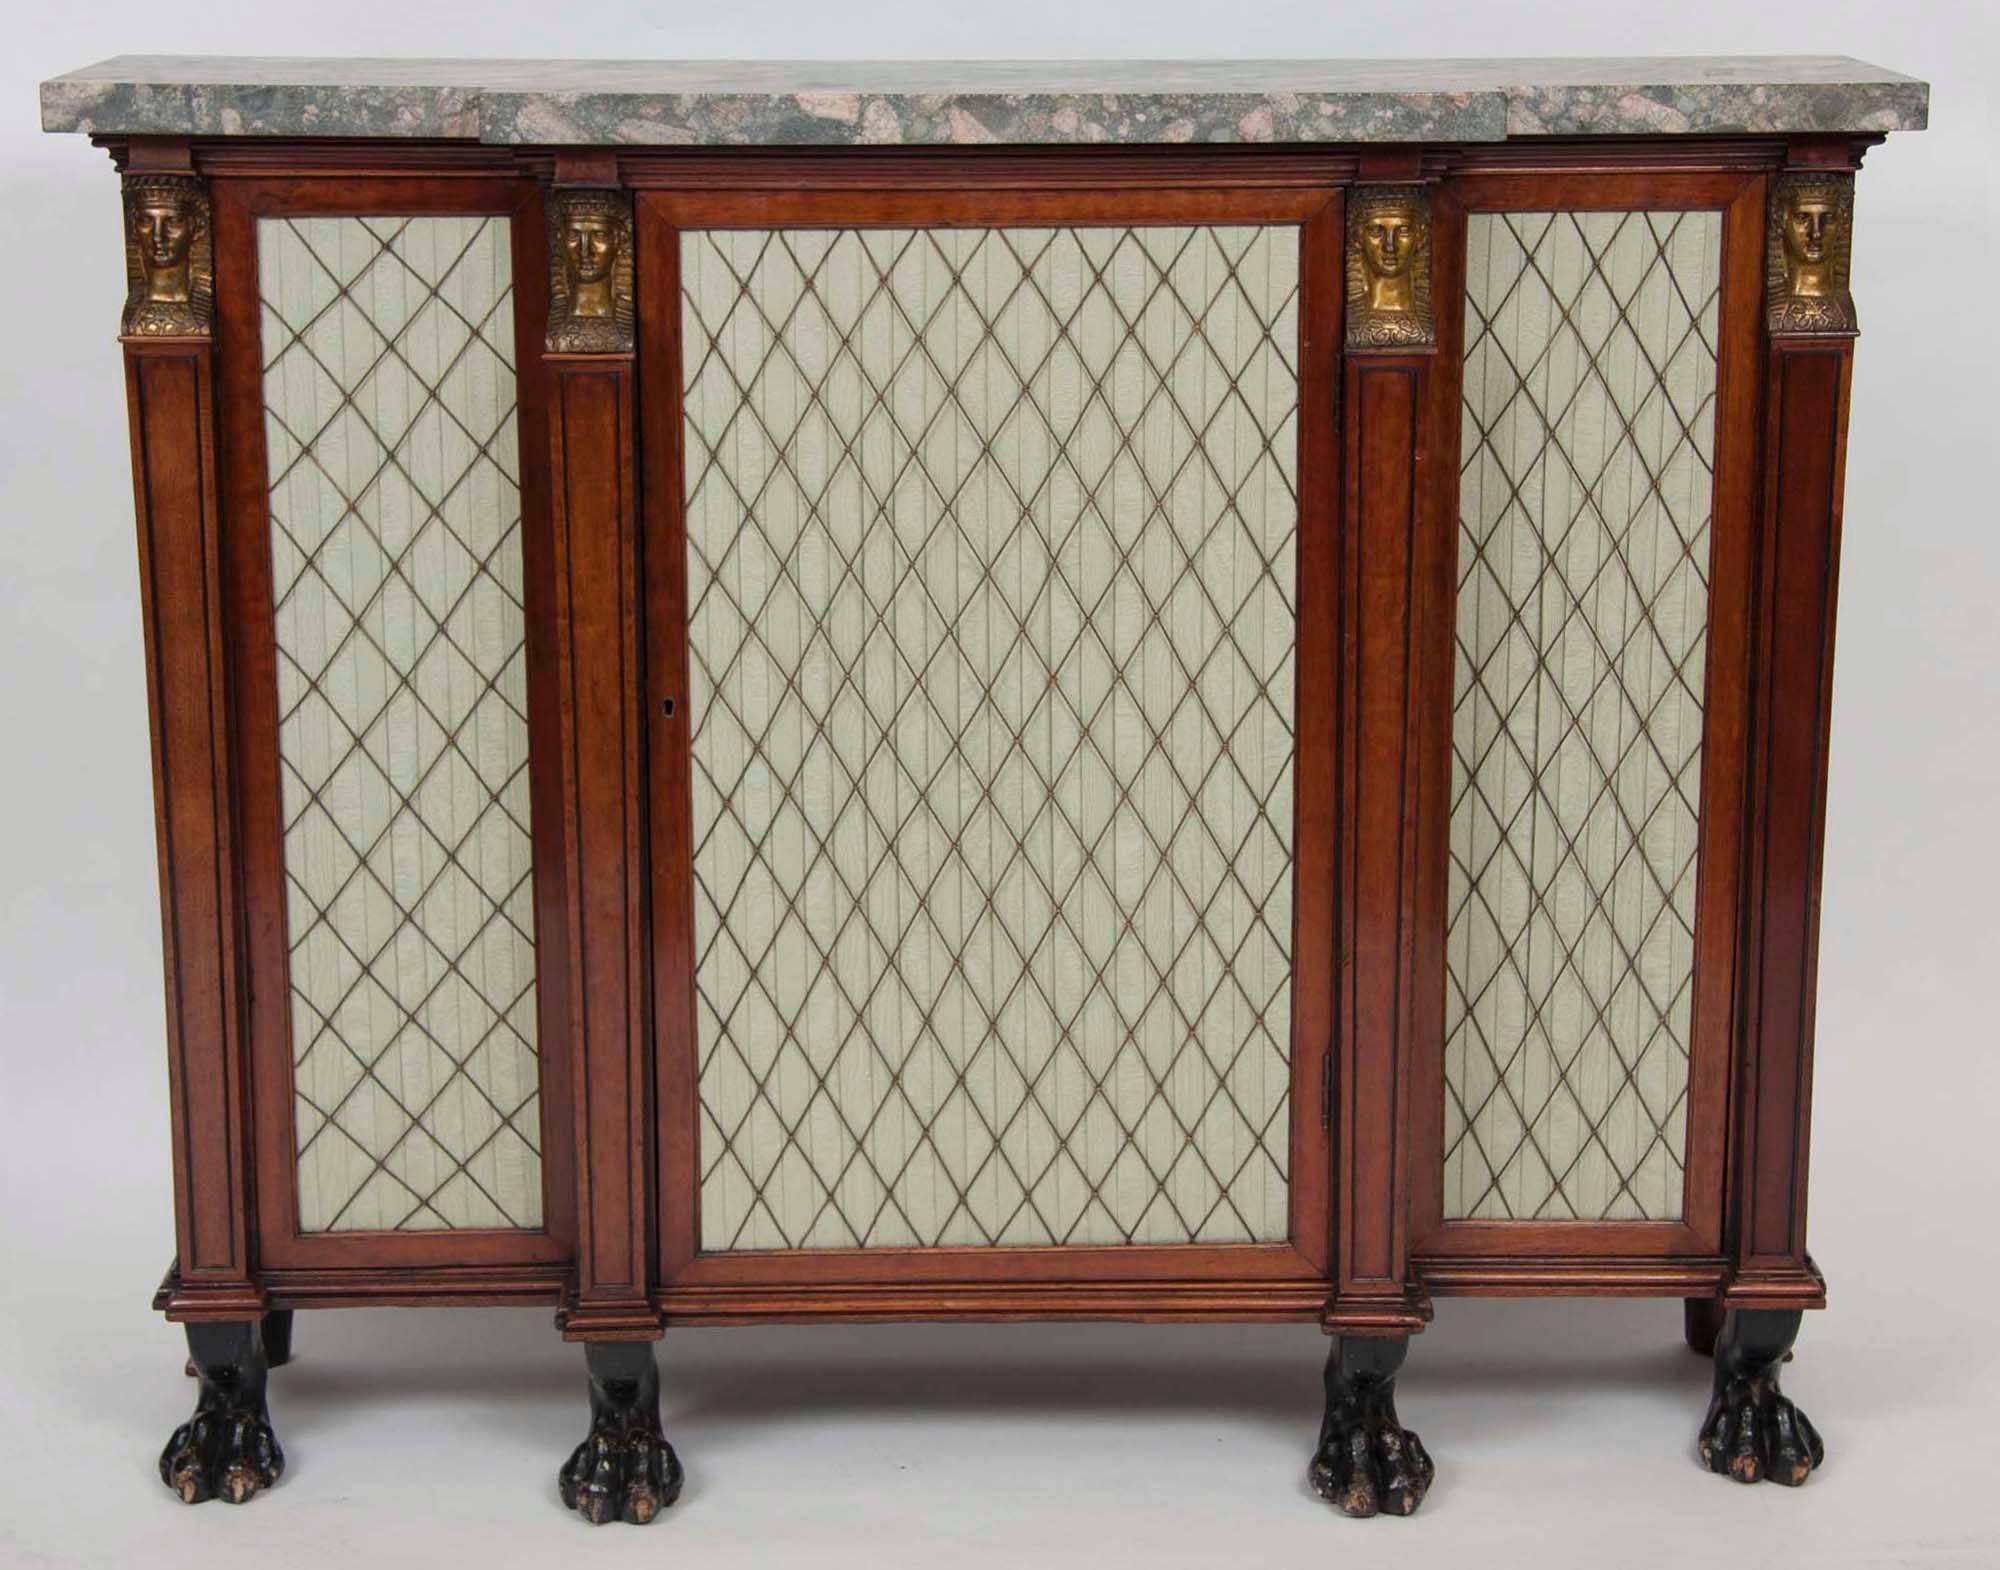 English Regency side cabinet with marble top, circa 1810.
       